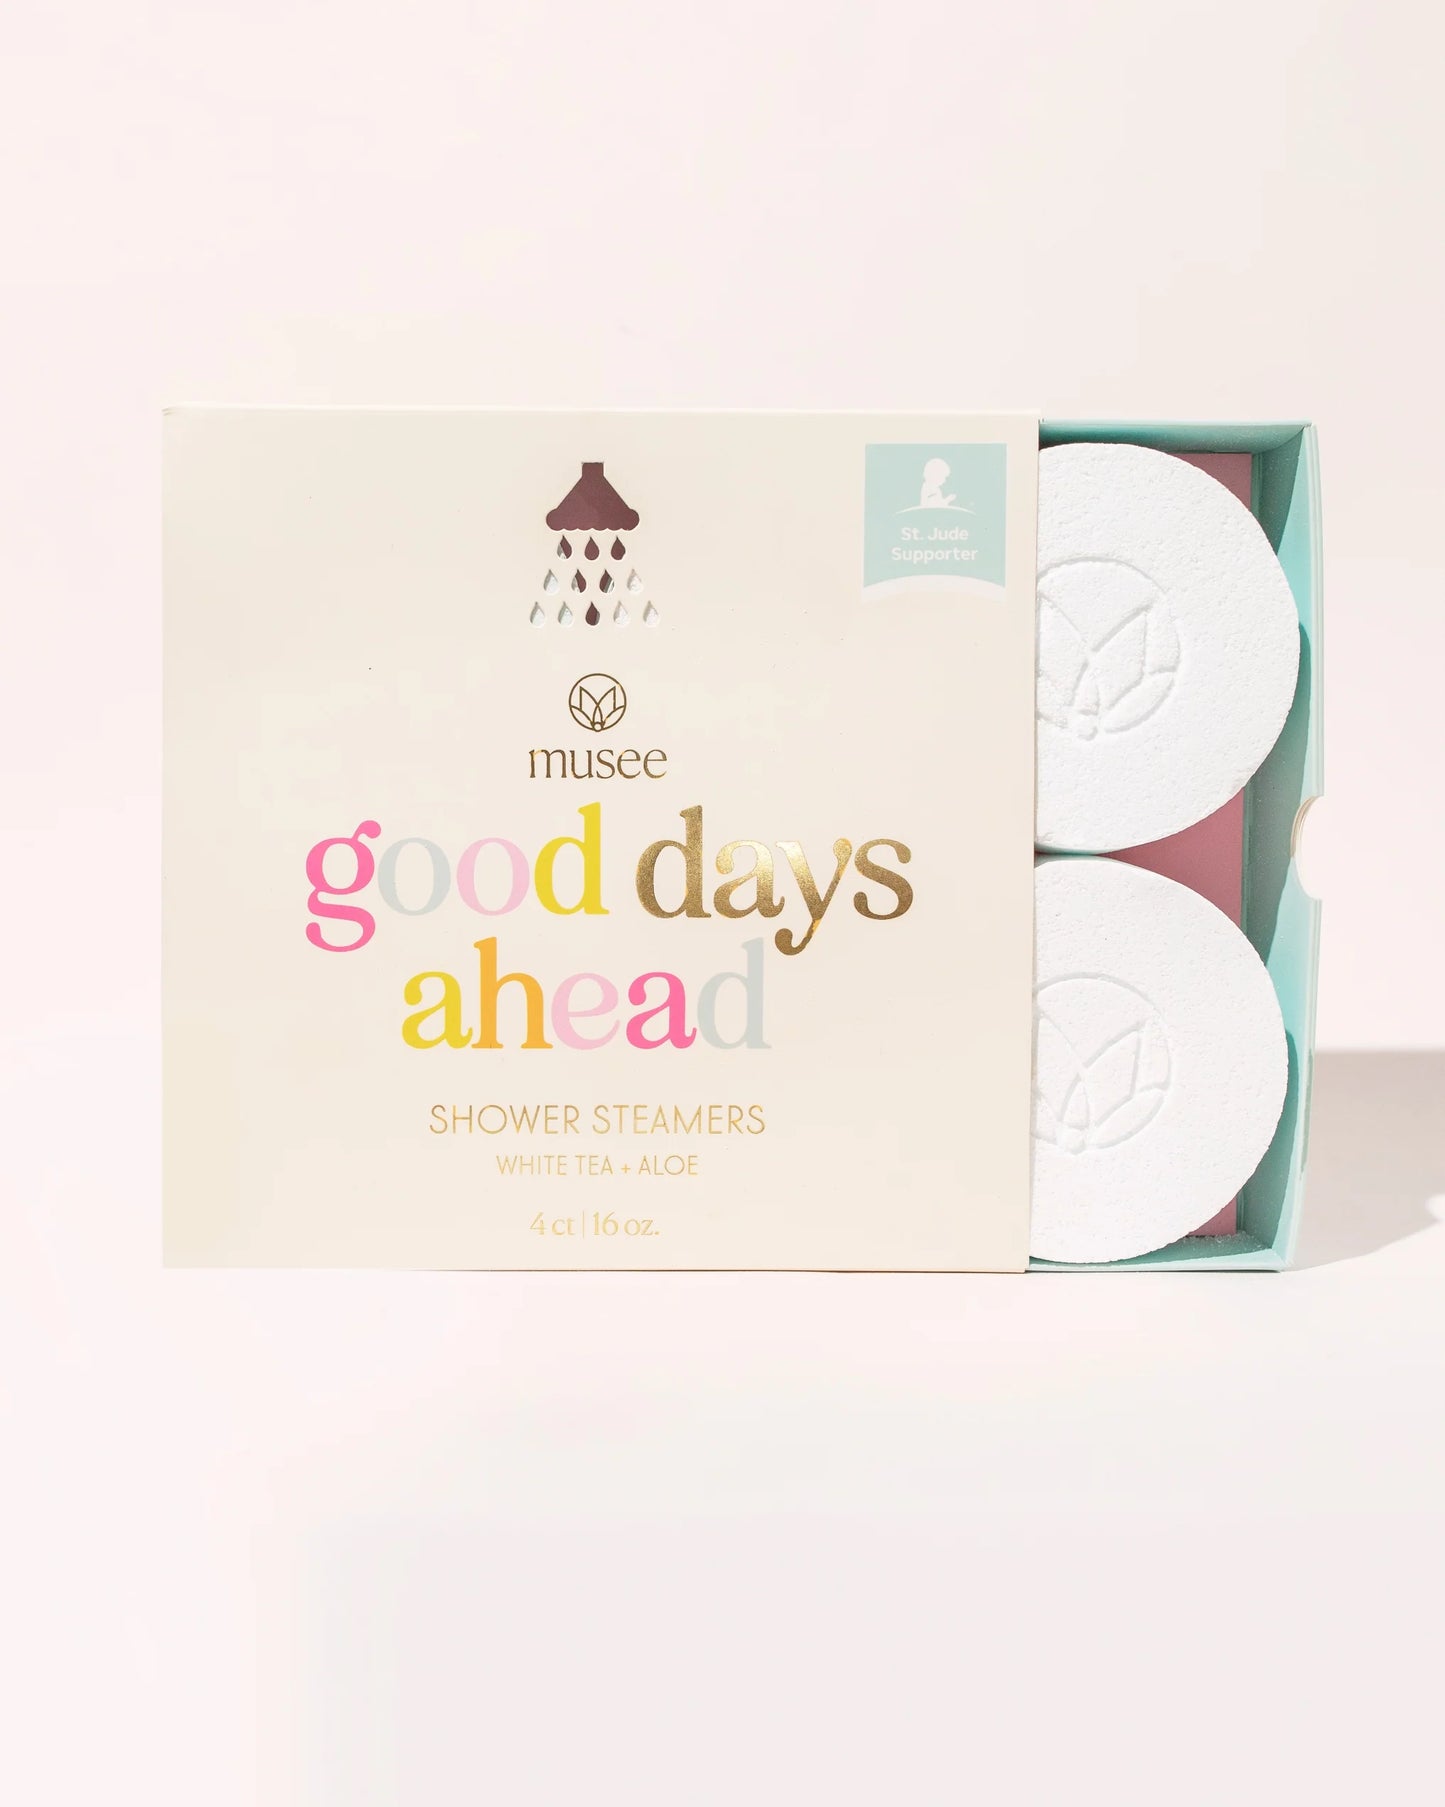 St. Jude Good Days Ahead Shower Steamers